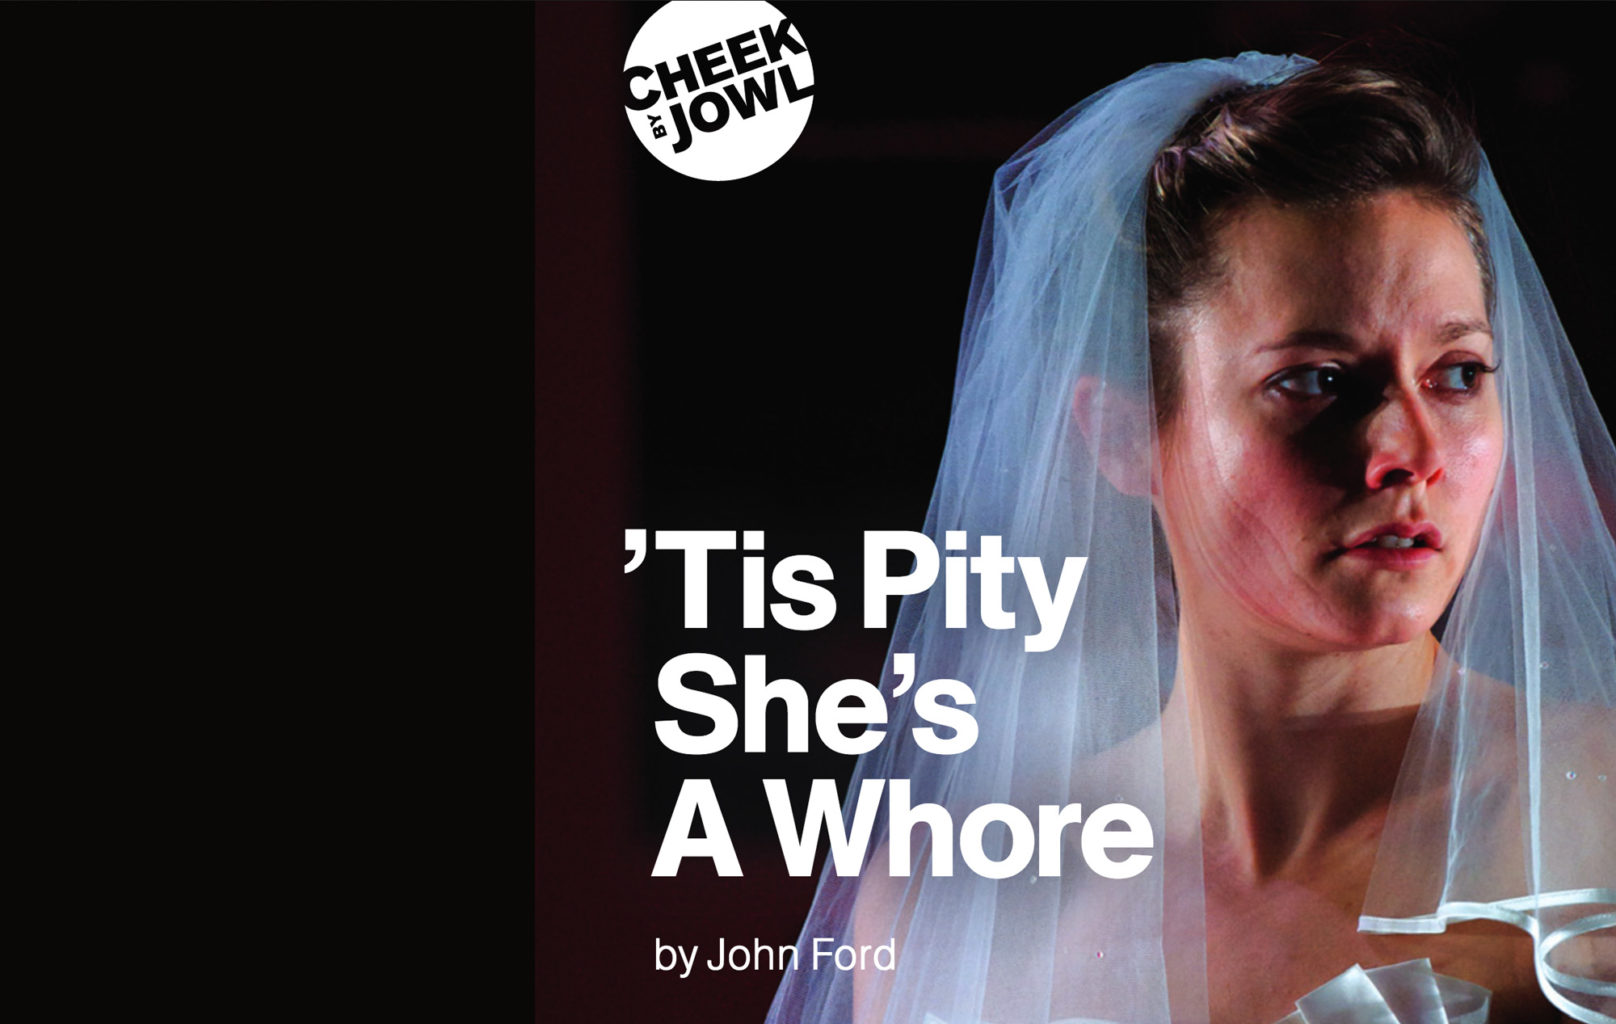 Programme of Cheek by Jowl’s production of ‘Tis Pity She’s A Whore (2011–2012)